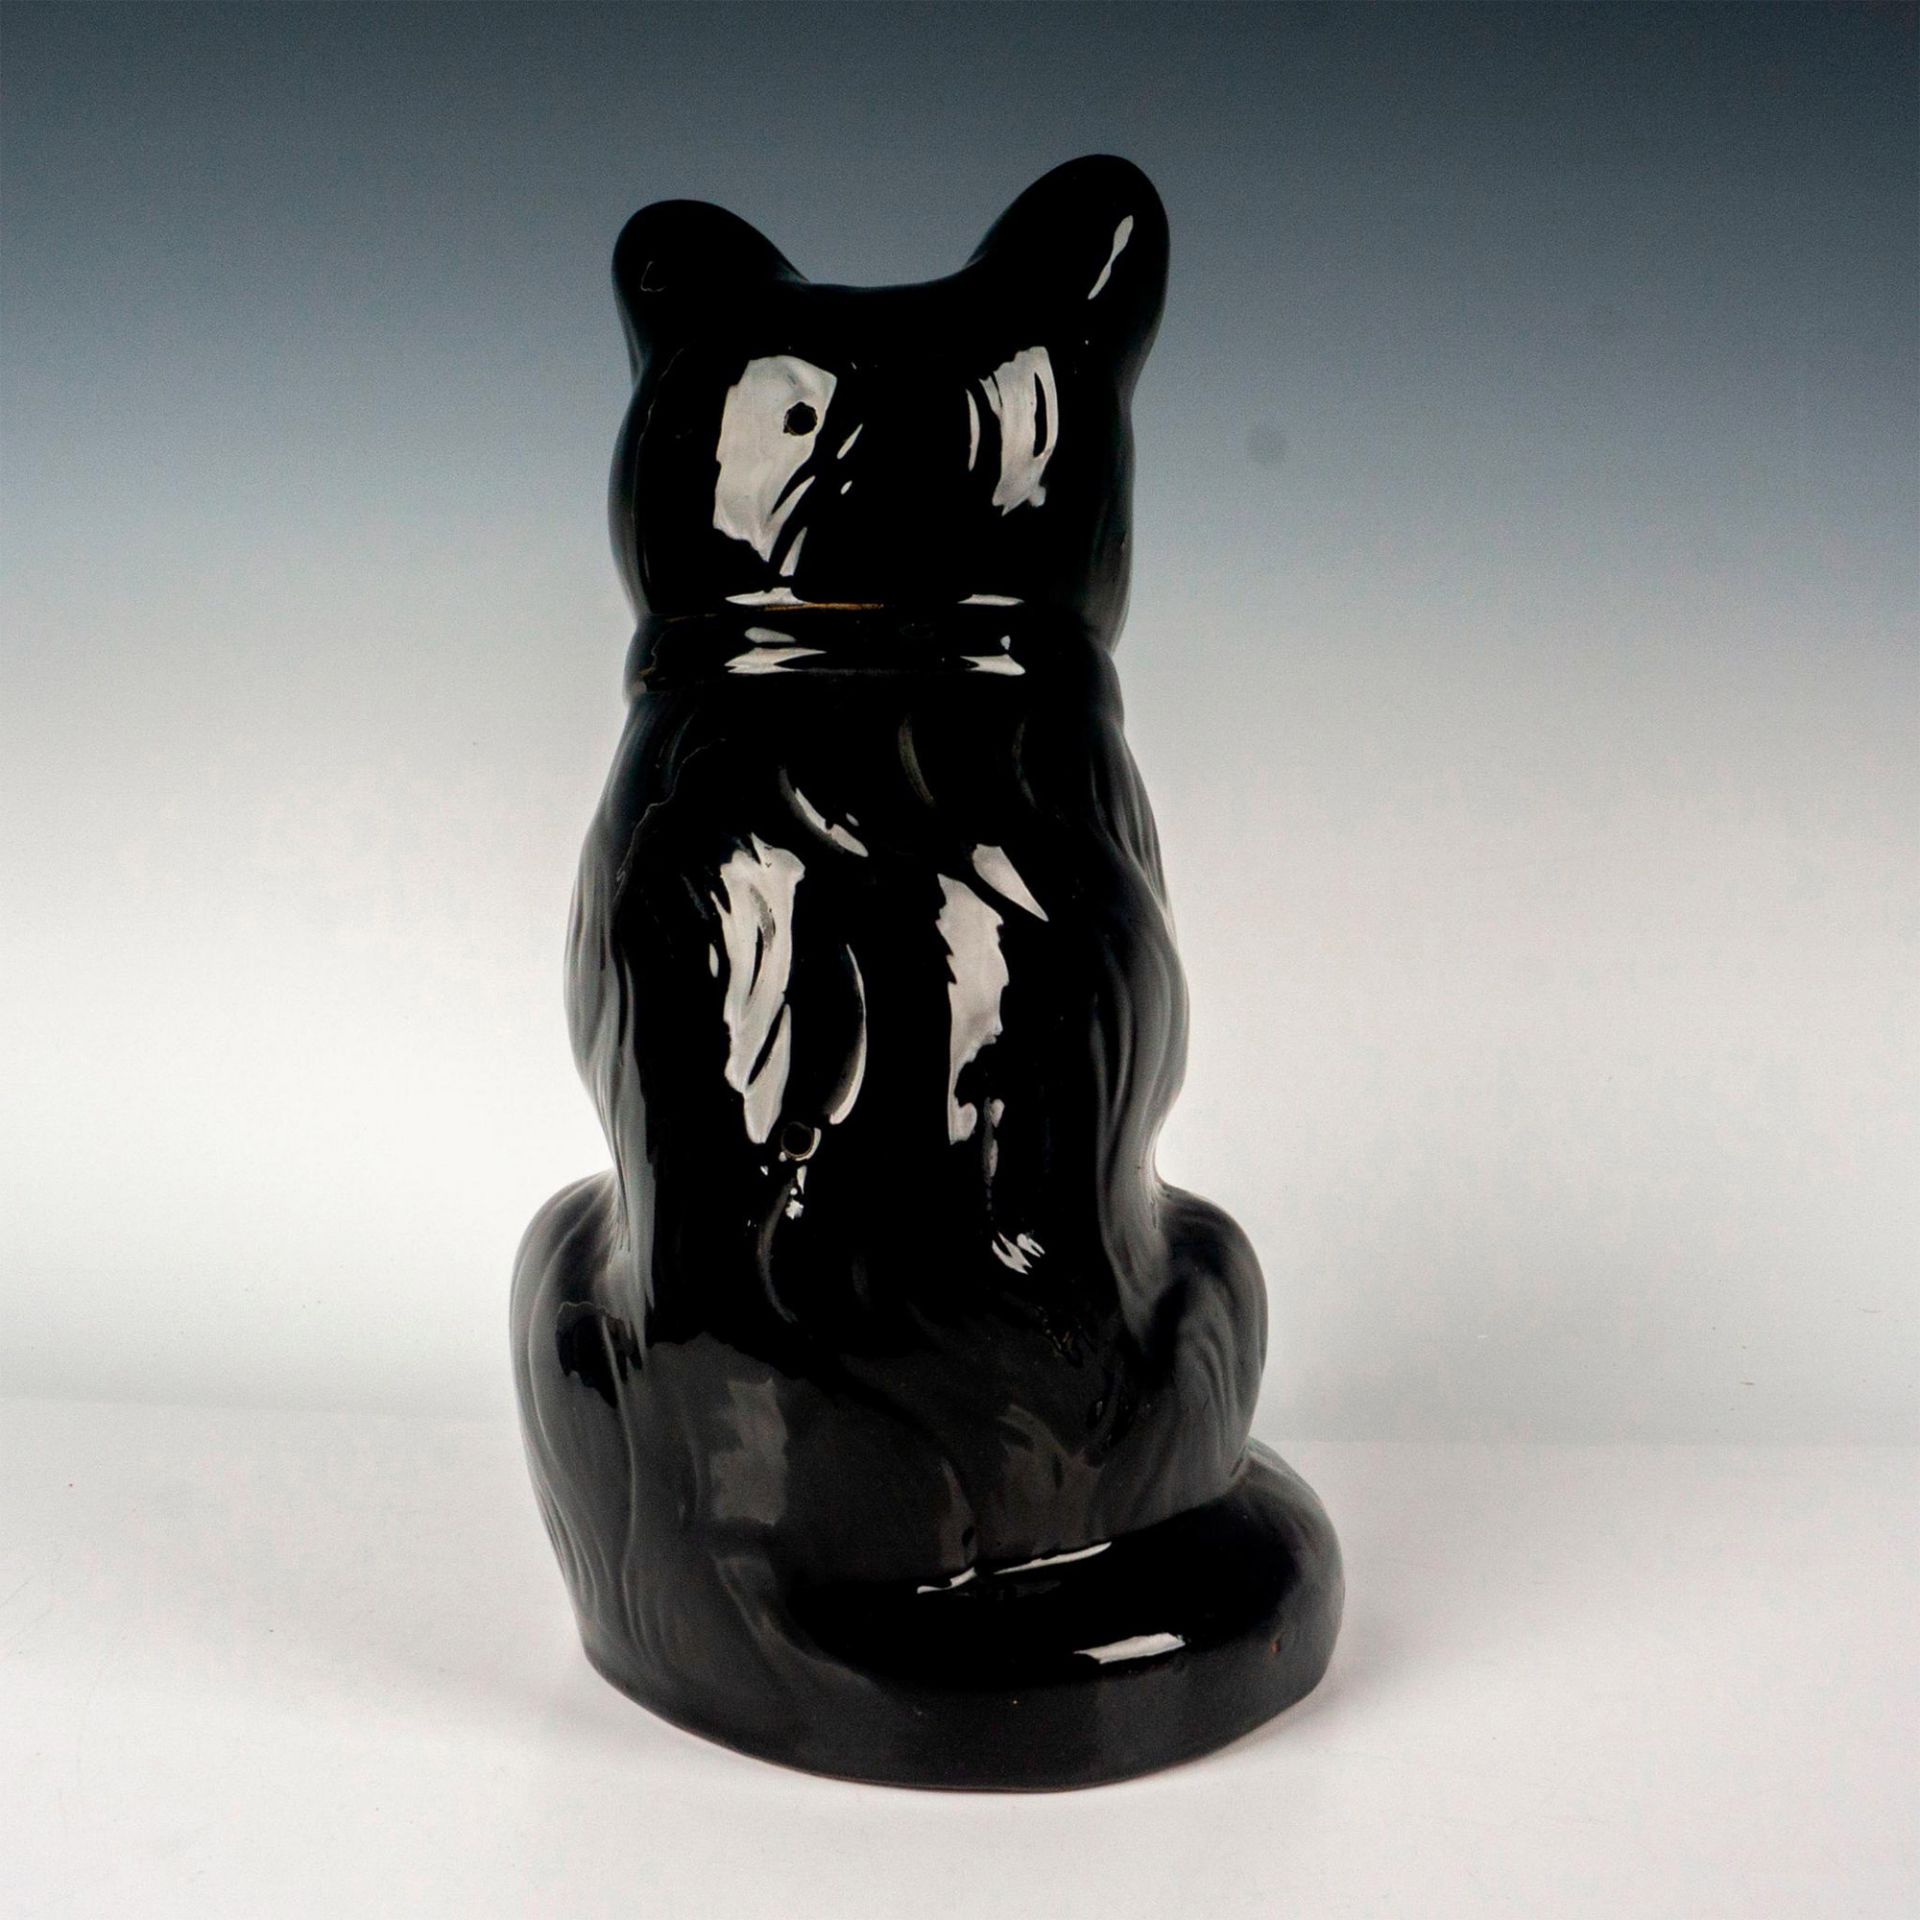 Jackfield or Barge Ware Pottery Figurine, Seated Cat - Image 2 of 3